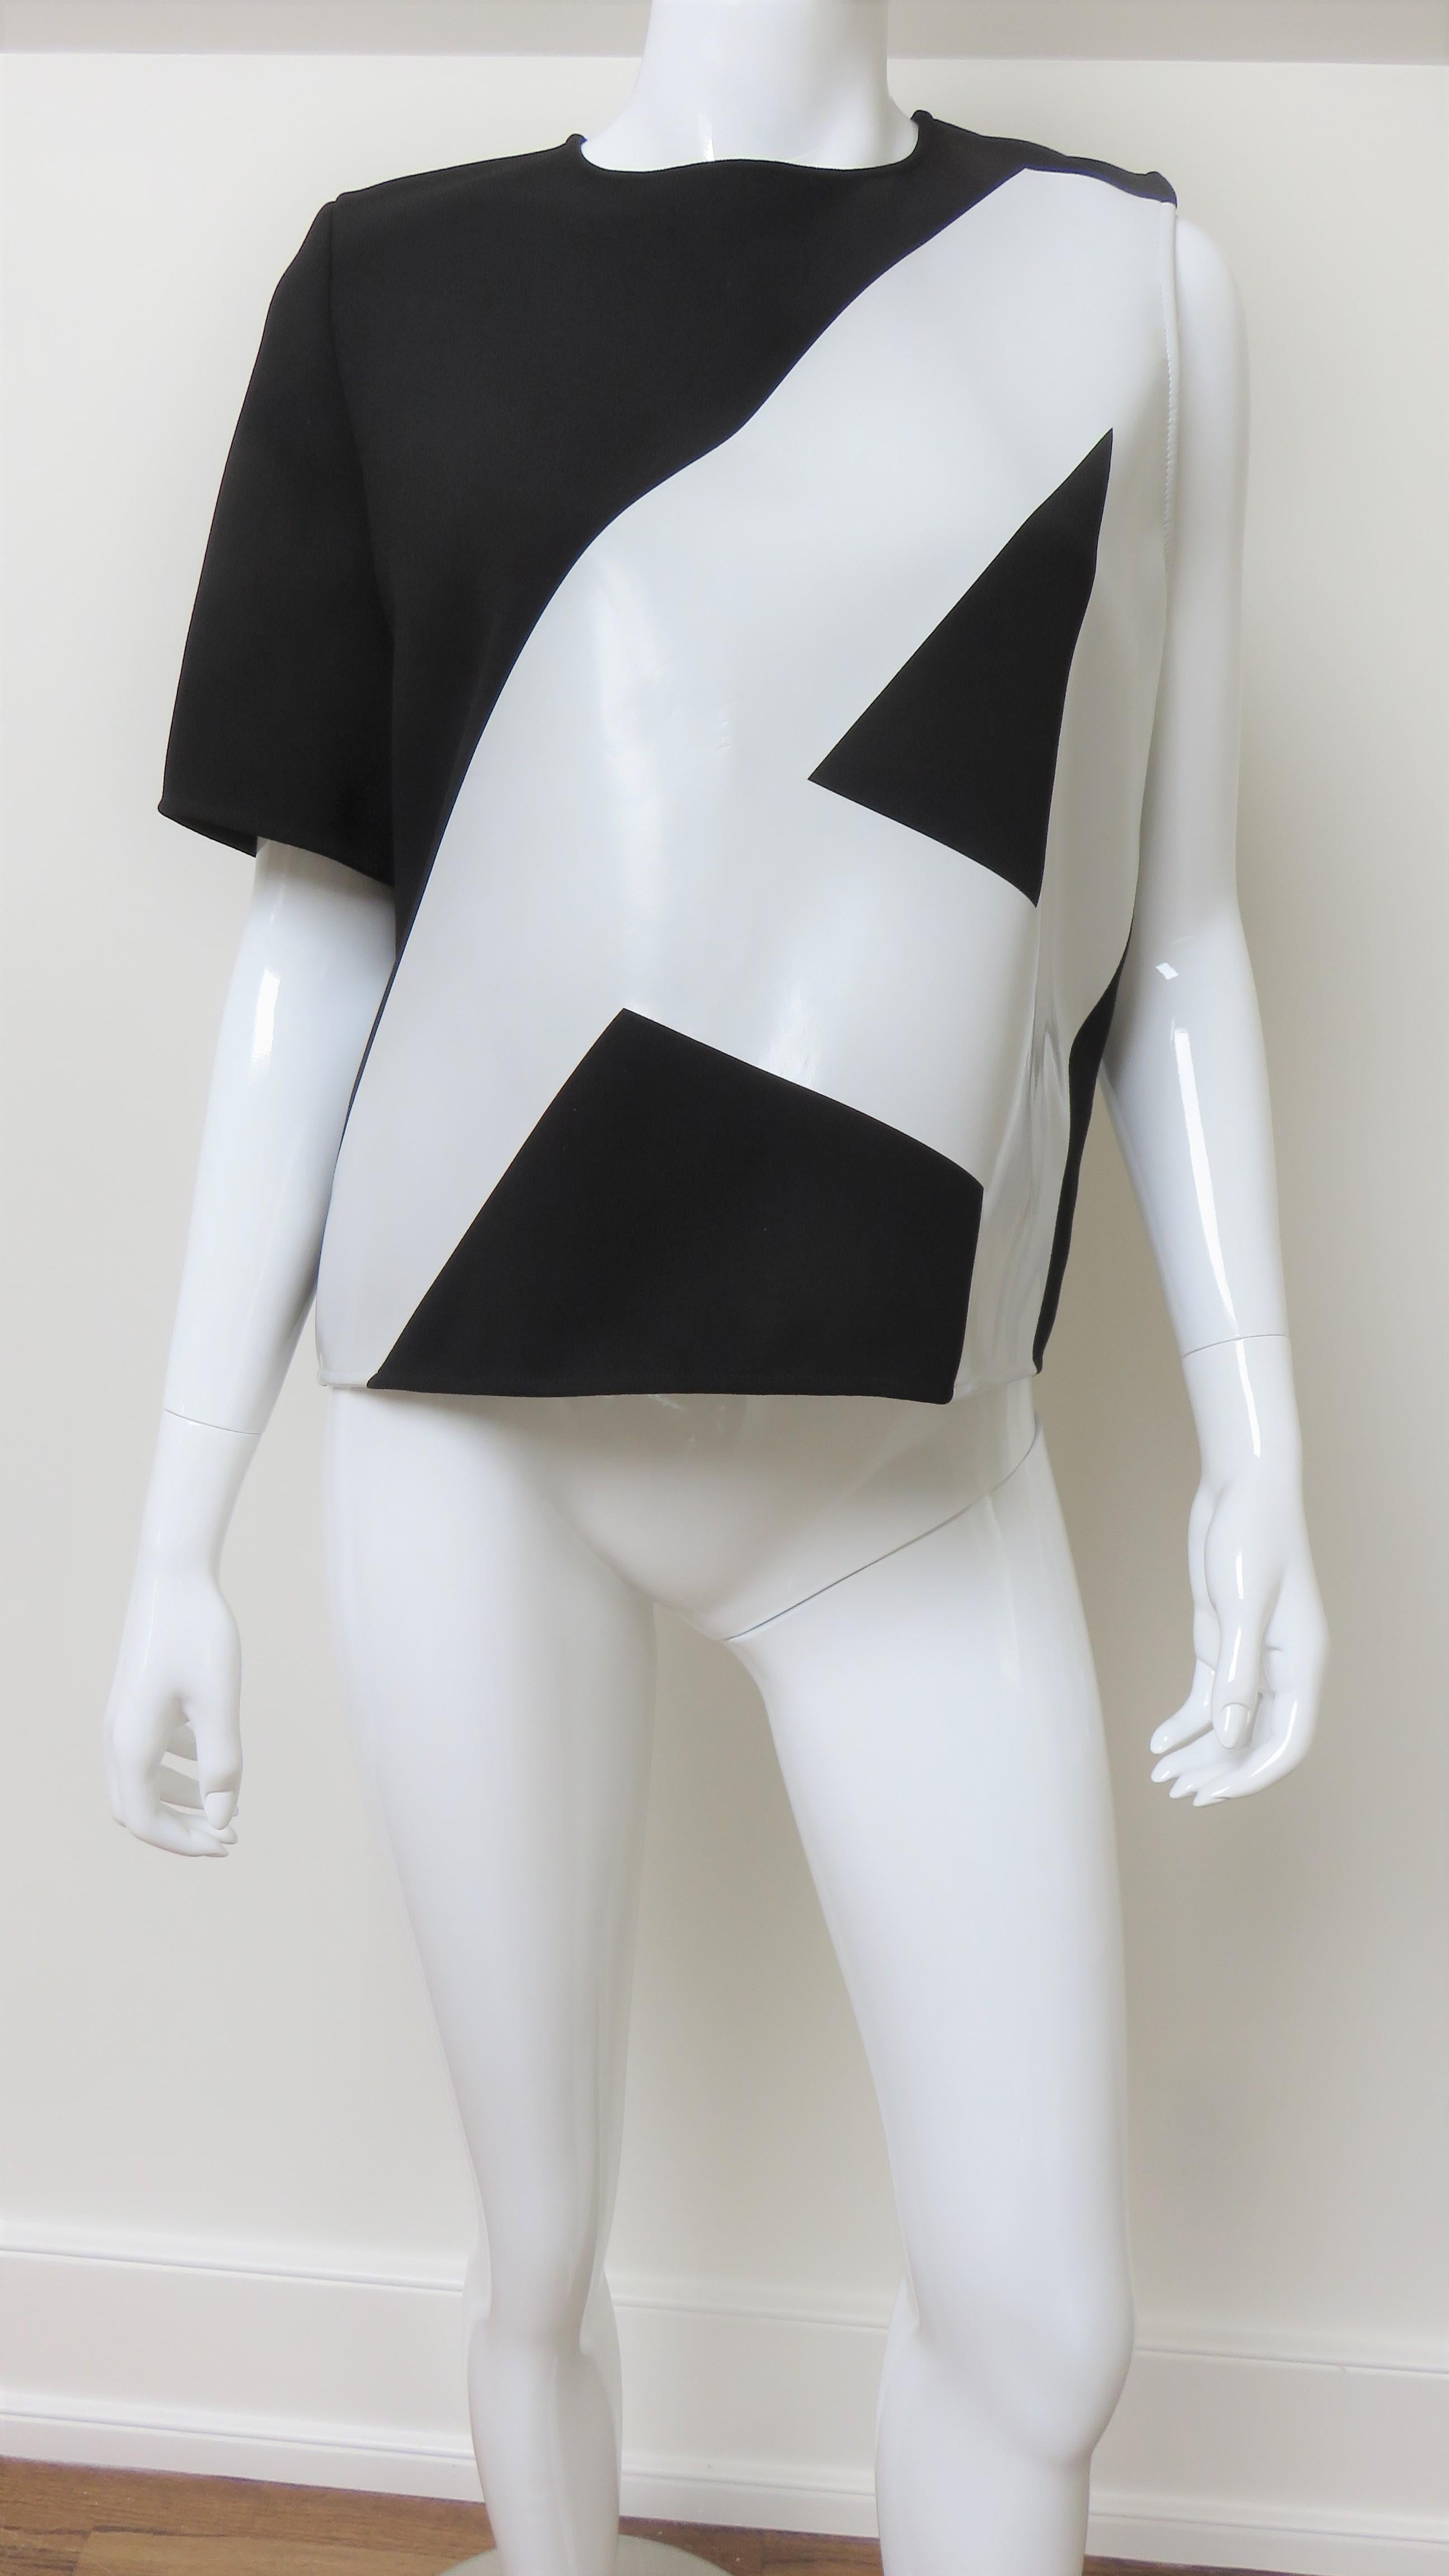 A fabulous black and white geometric top from Anthony Vaccarello.  It has a crew neckline, one short sleeve and a white shiny tilted capital A on the front.  It has a back zipper at the neck. There is a small pen mark at the side seam, priced